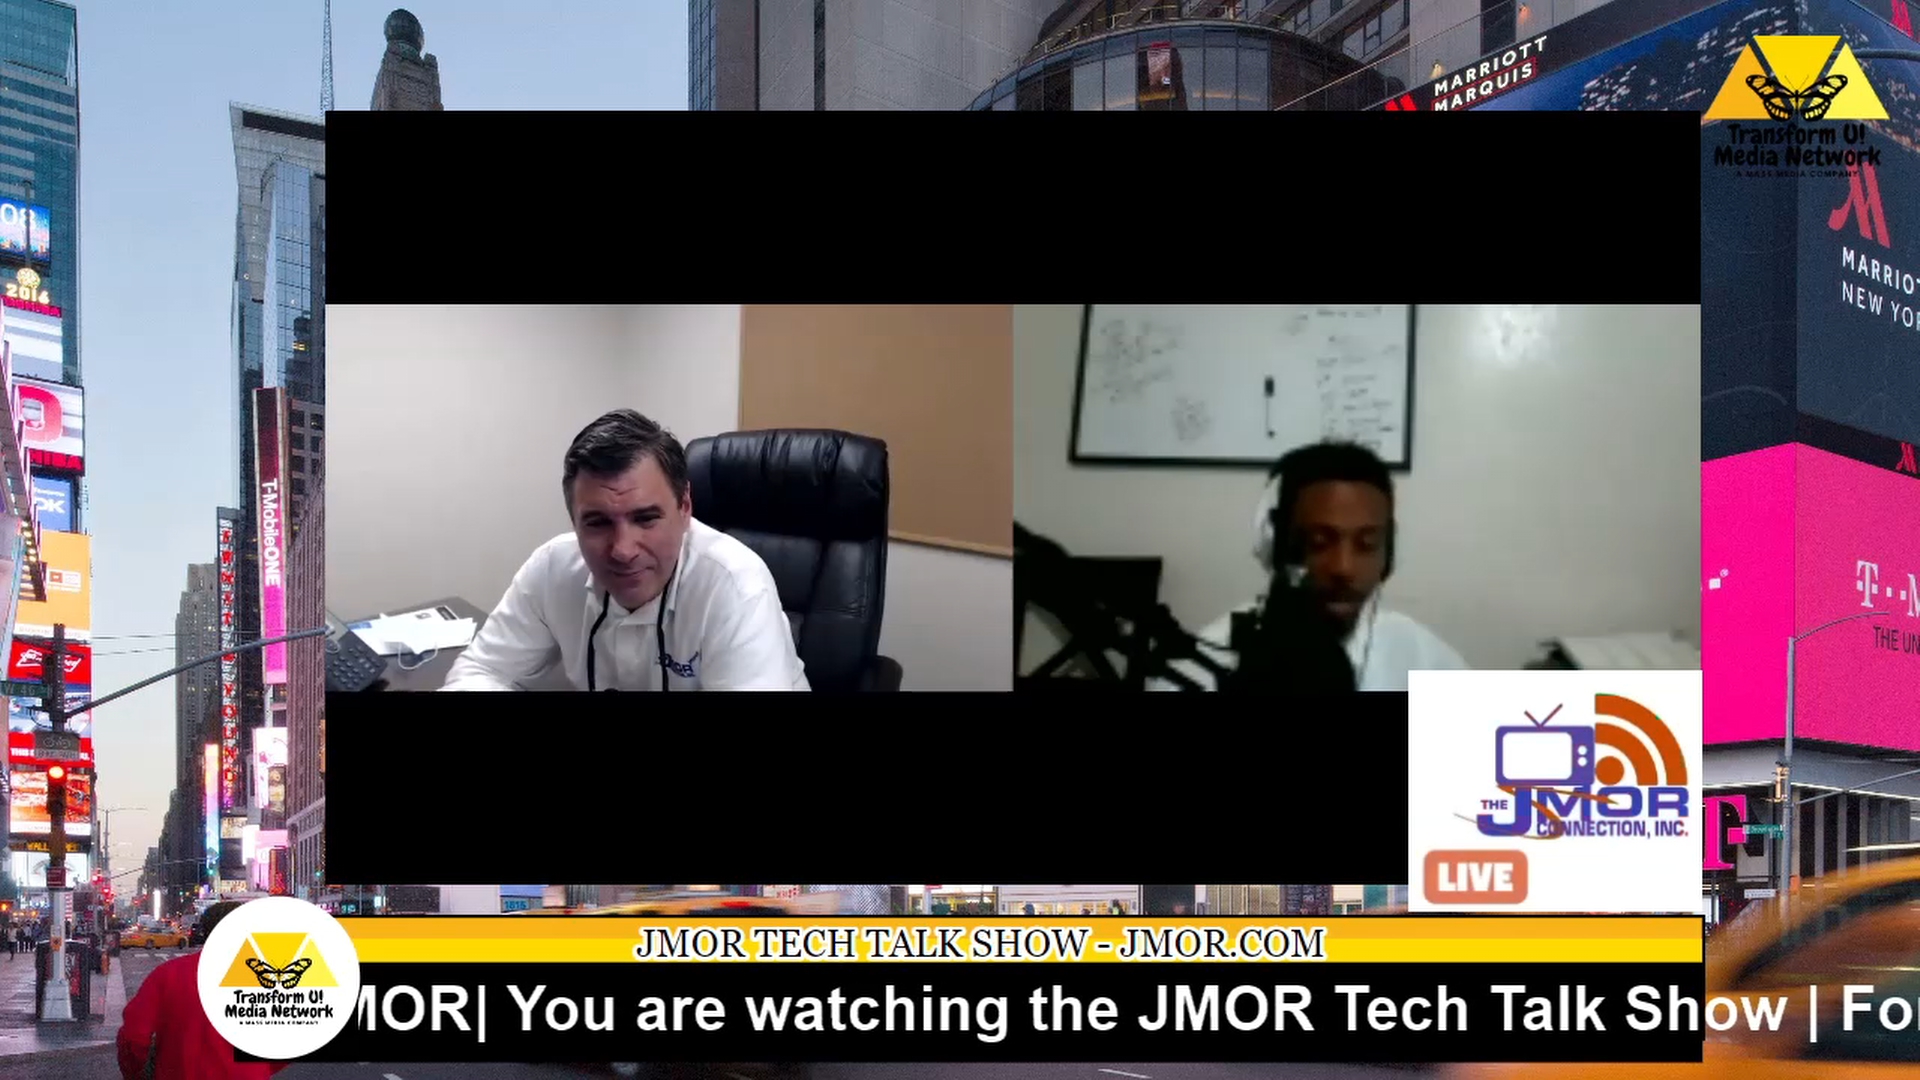 JMOR Tech Talk Show 2020 E11:  Amazon and Drone Deliverys, Schools Reopening, Tesla Self Driving Cars and More...